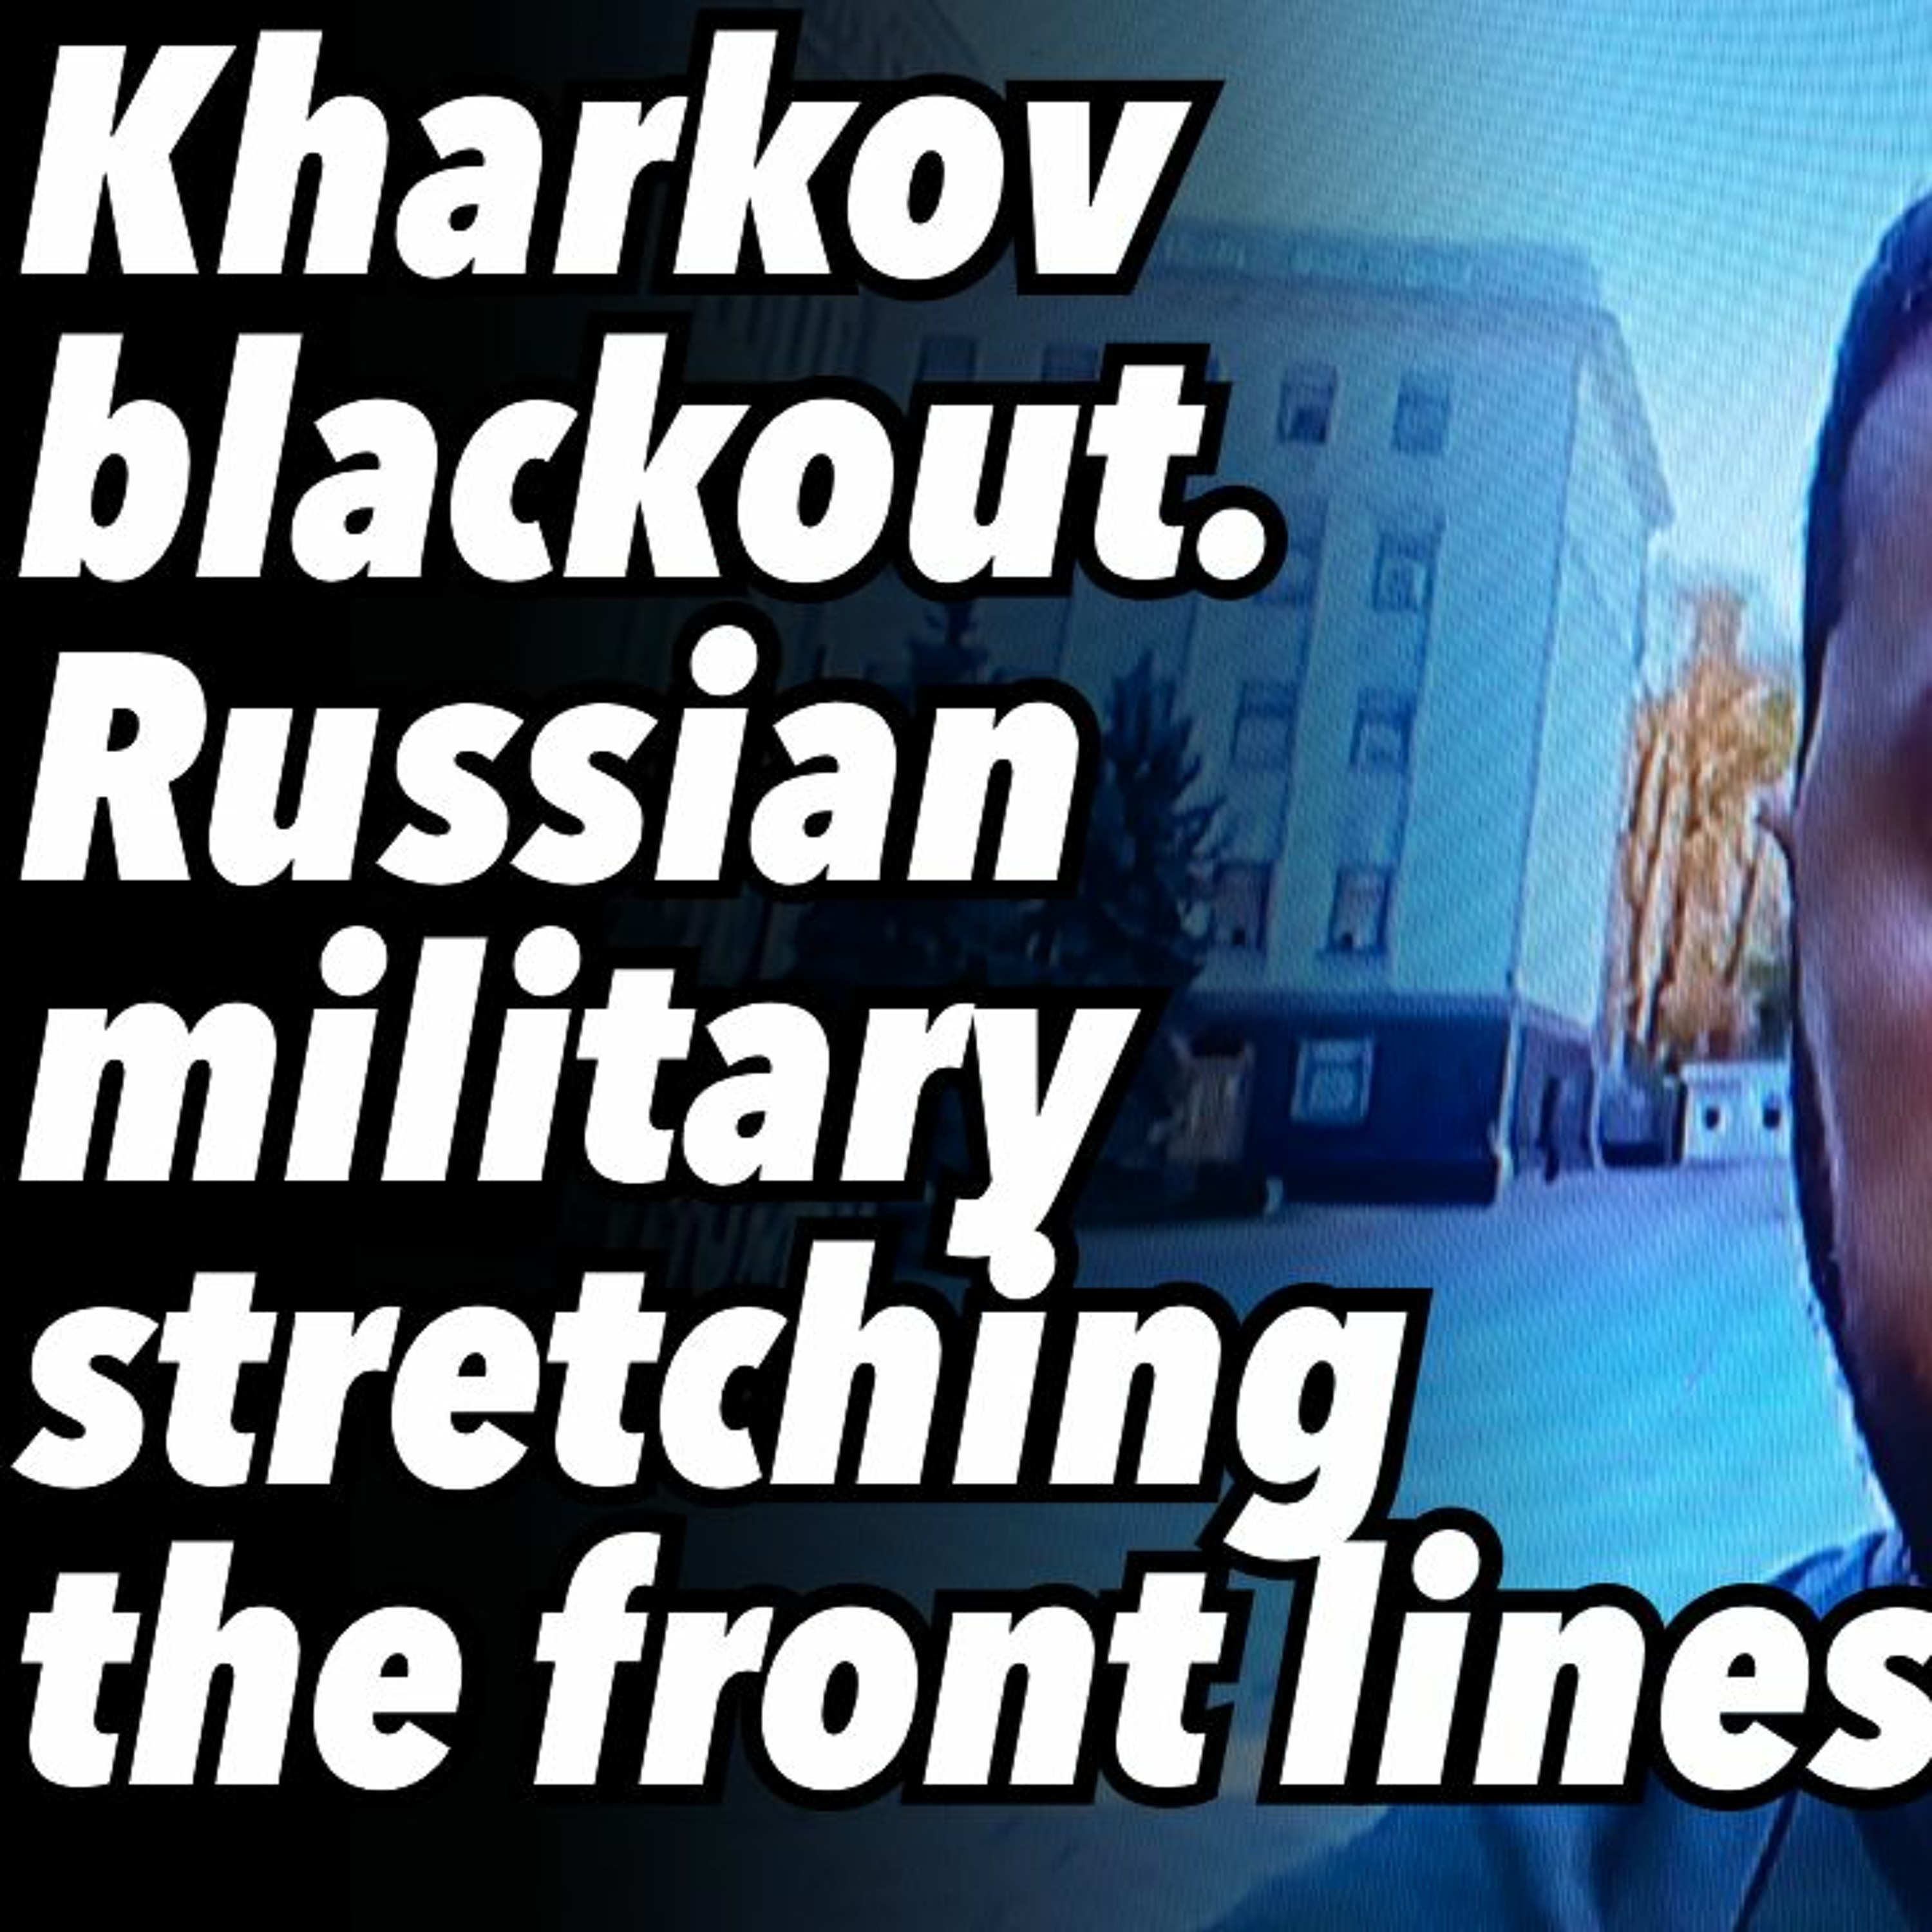 Kharkov blackout. Russian military stretching the front lines